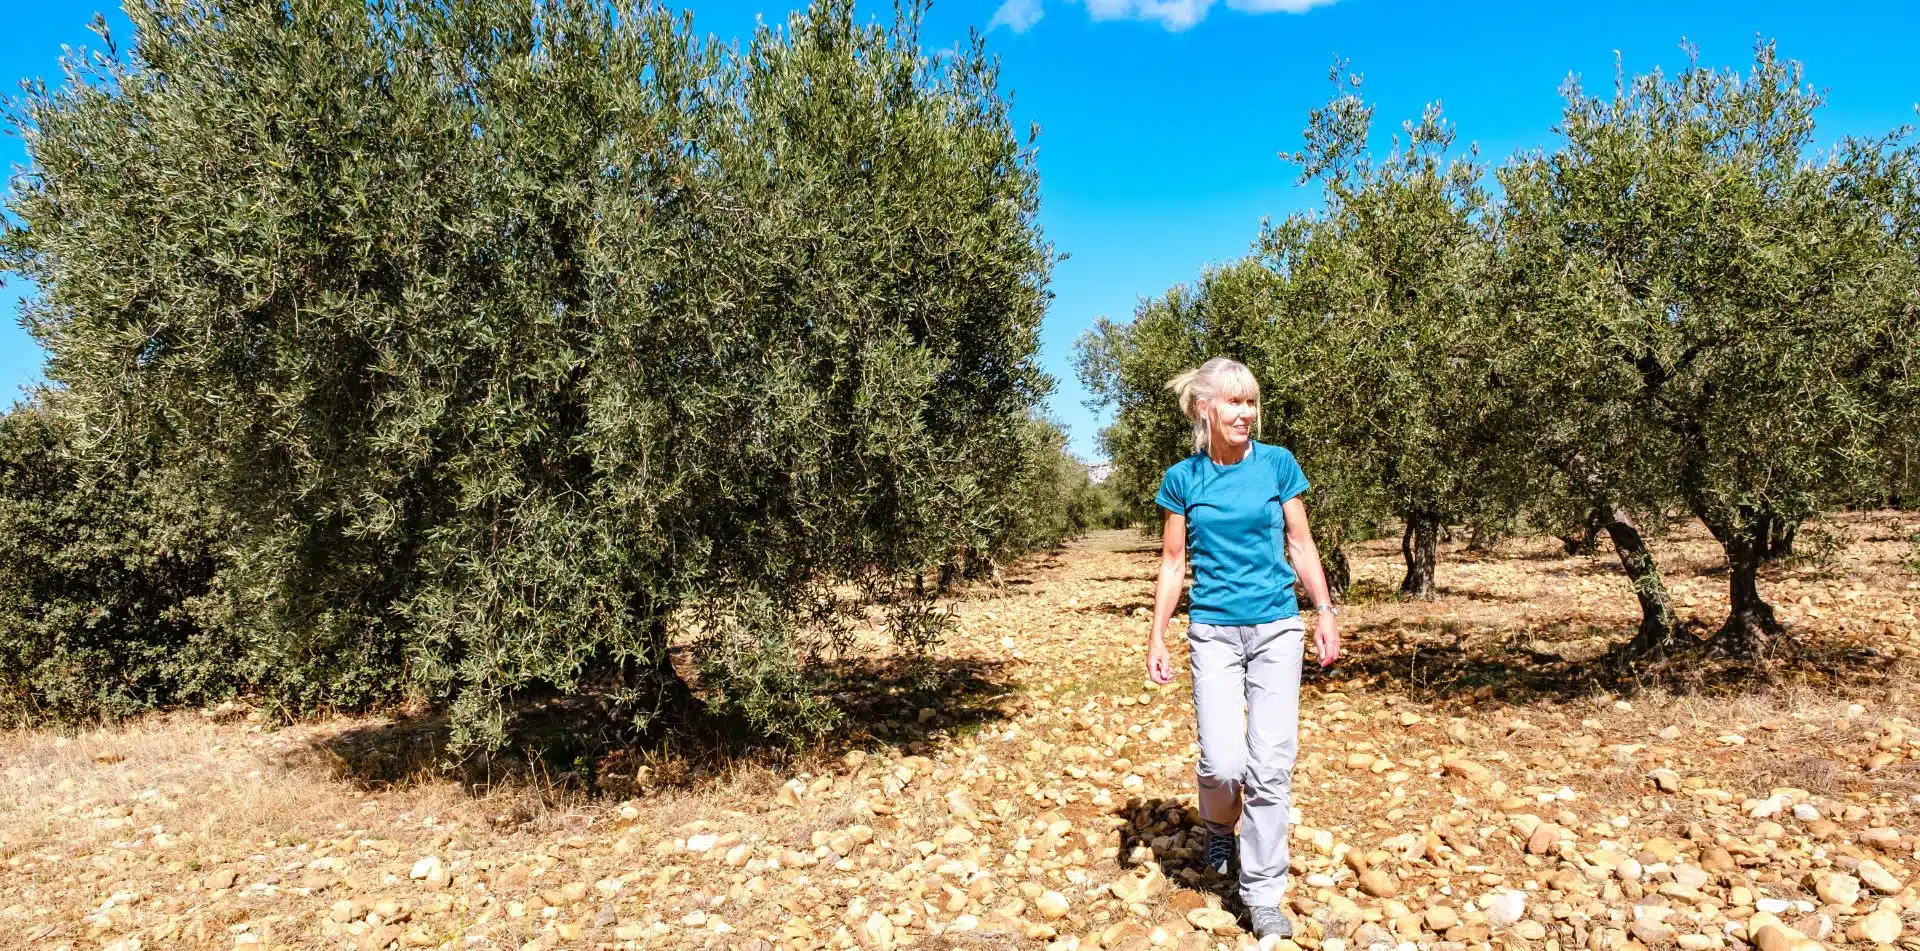 4 - Walk through olive groves on your way to taste award-winning olive oil